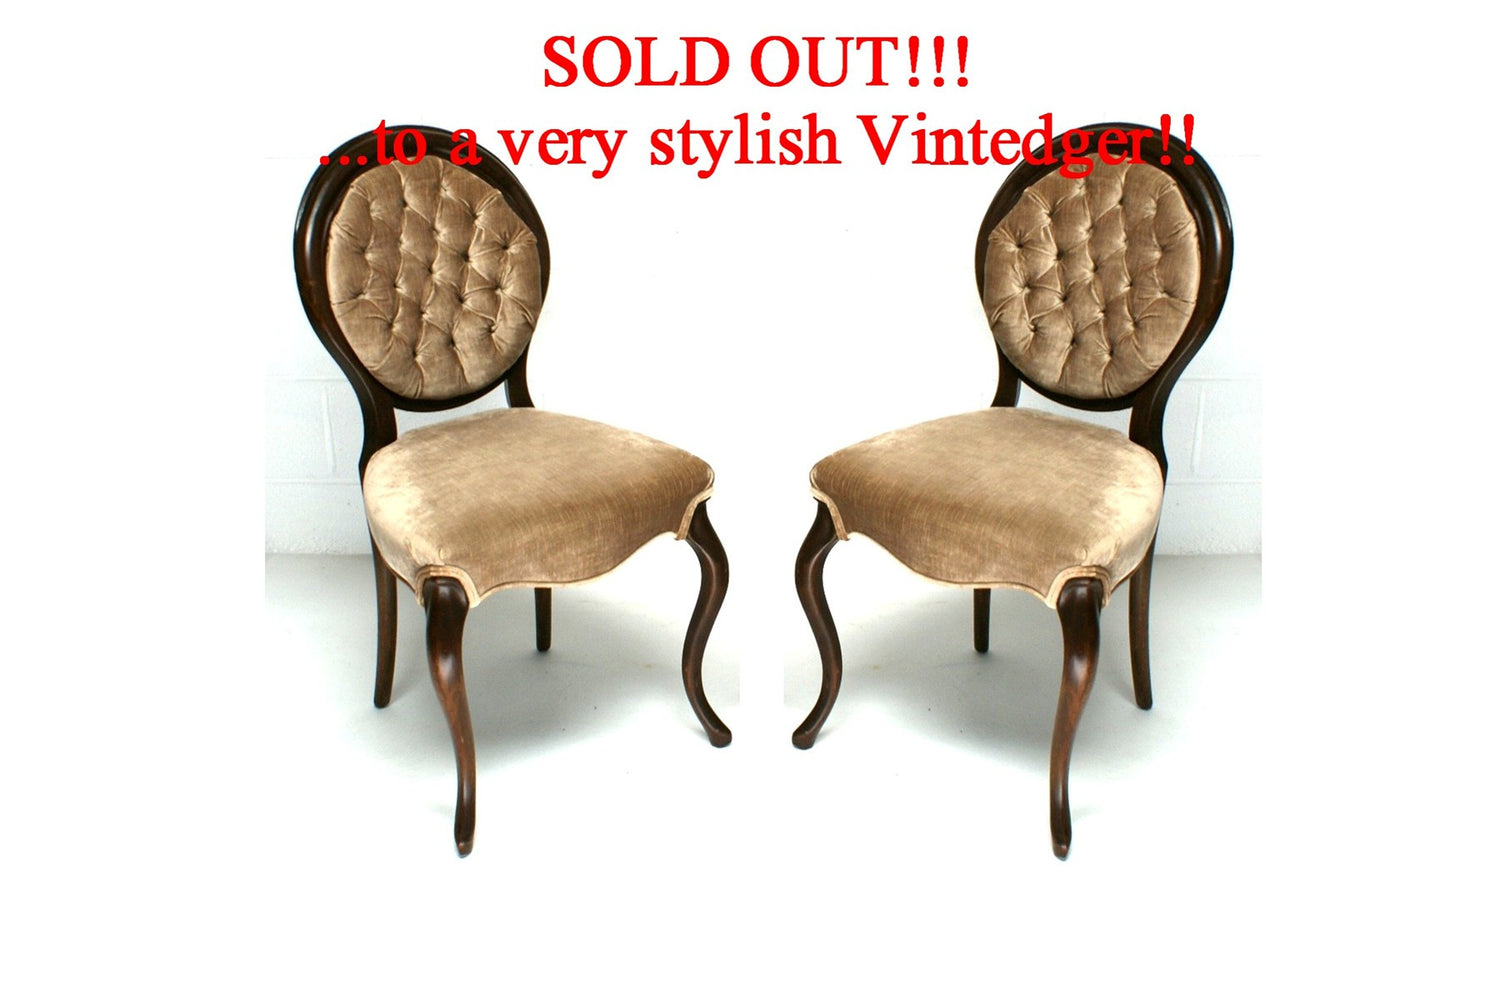 SOLD - Victorian Tufted Chairs S/2 The Vintedge Co.